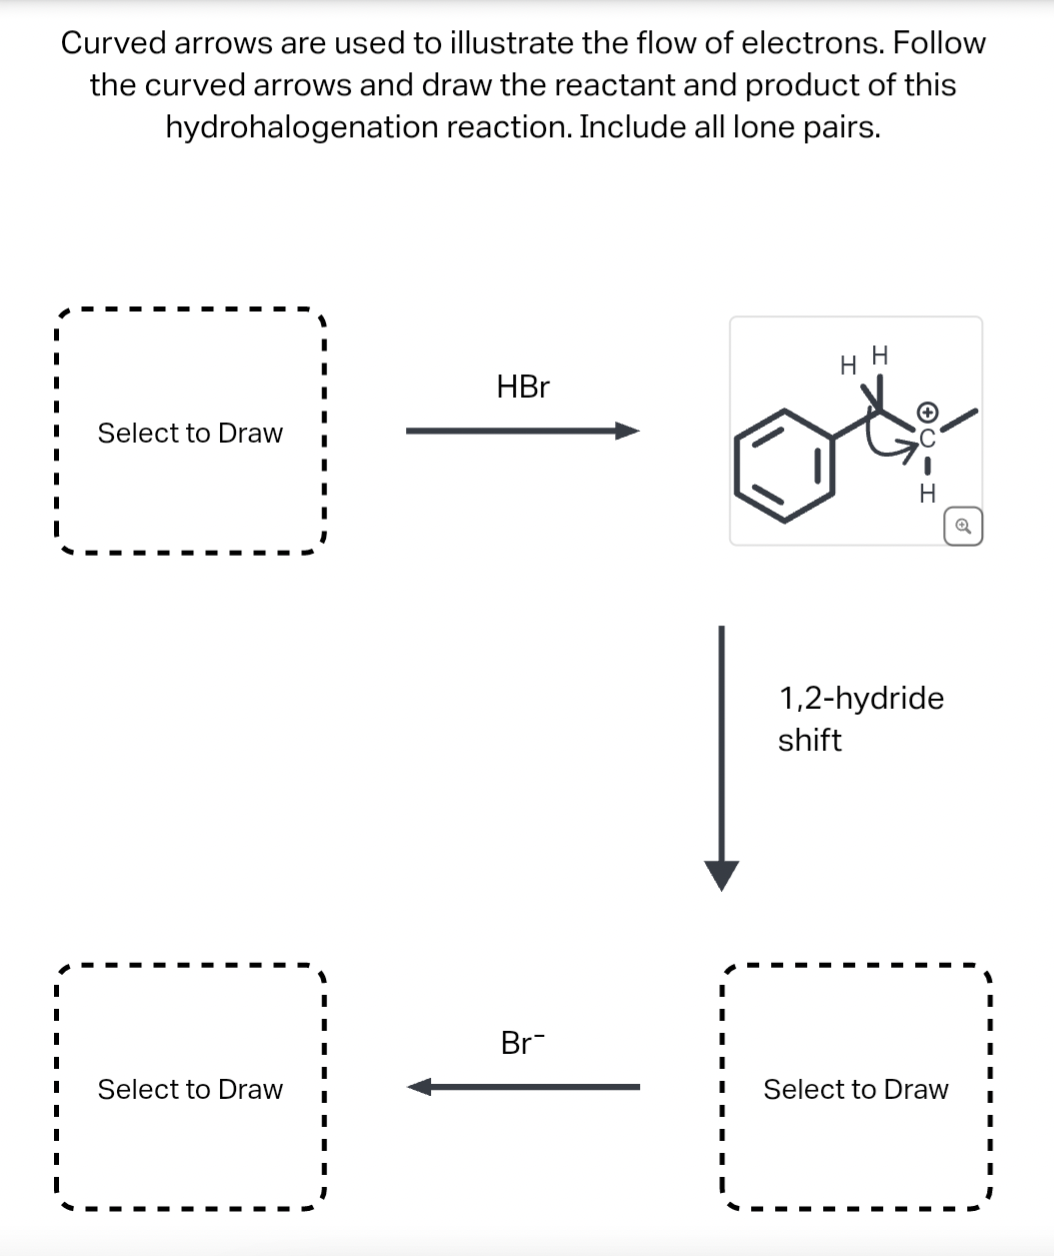 Curved arrows are used to illustrate the flow of electrons. Follow
the curved arrows and draw the reactant and product of this
hydrohalogenation reaction. Include all lone pairs.
Select to Draw I
Select to Draw
I
I
HBr
Br
I
I
I
I
H H
CIH
1,2-hydride
shift
Select to Draw
Q